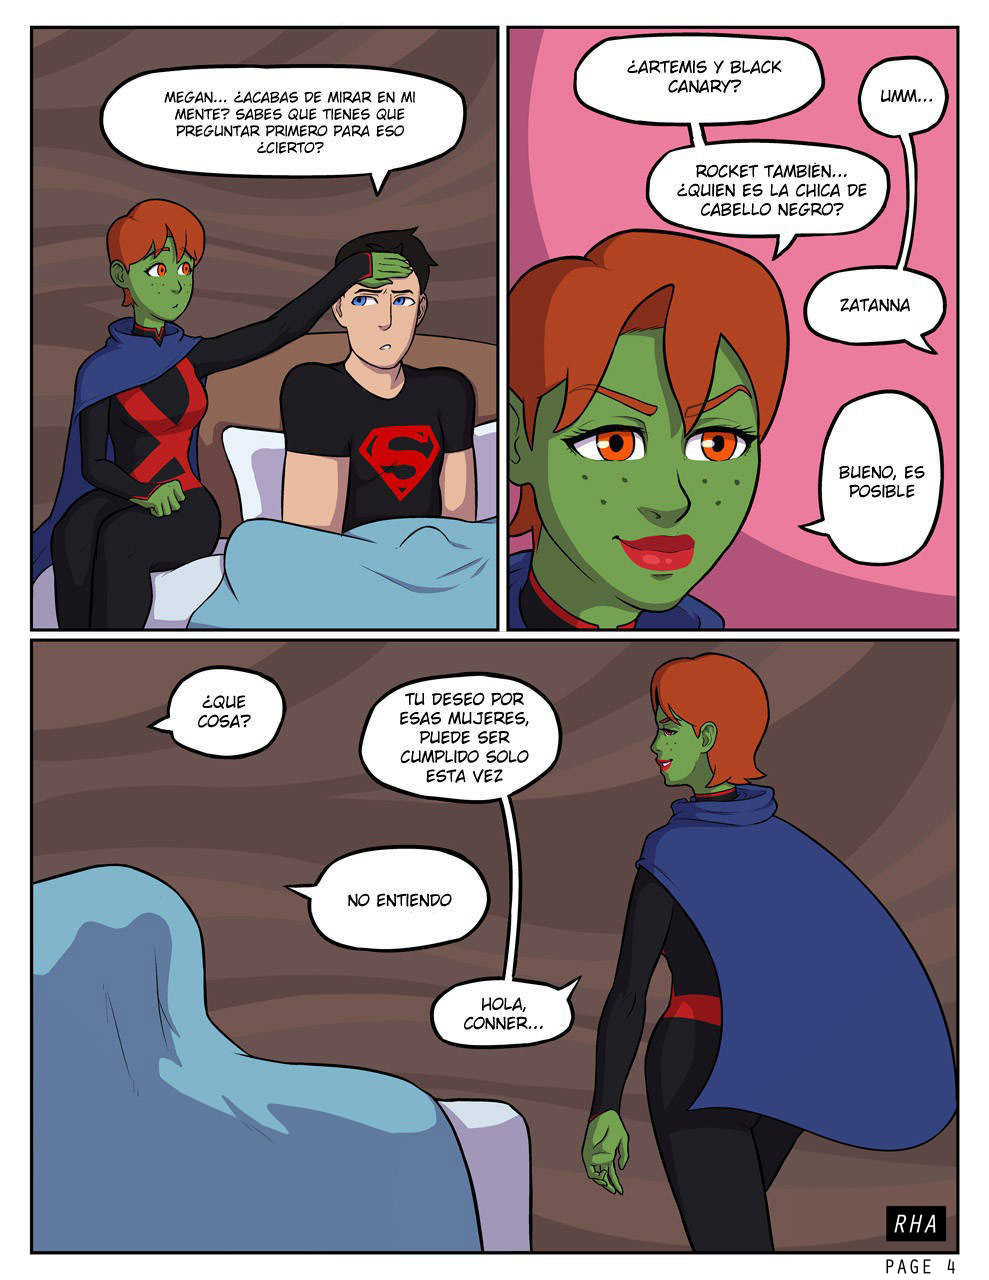 YOUNG JUSTICE - Supergreen